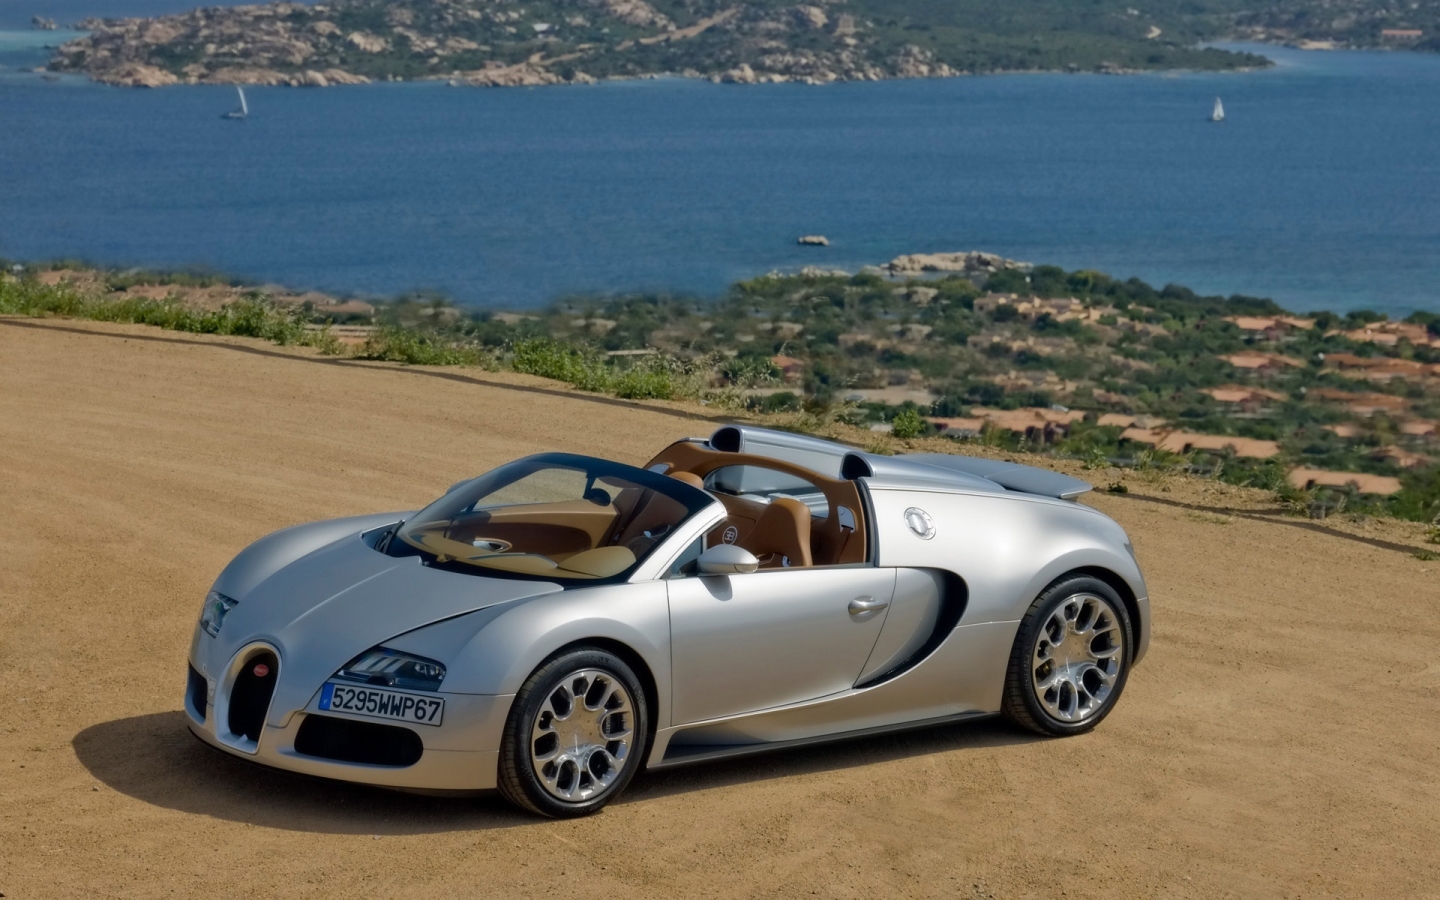 Bugatti Veyron 16.4 Grand Sport 2010 in Sardinia - Front And Side Panorama for 1440 x 900 widescreen resolution